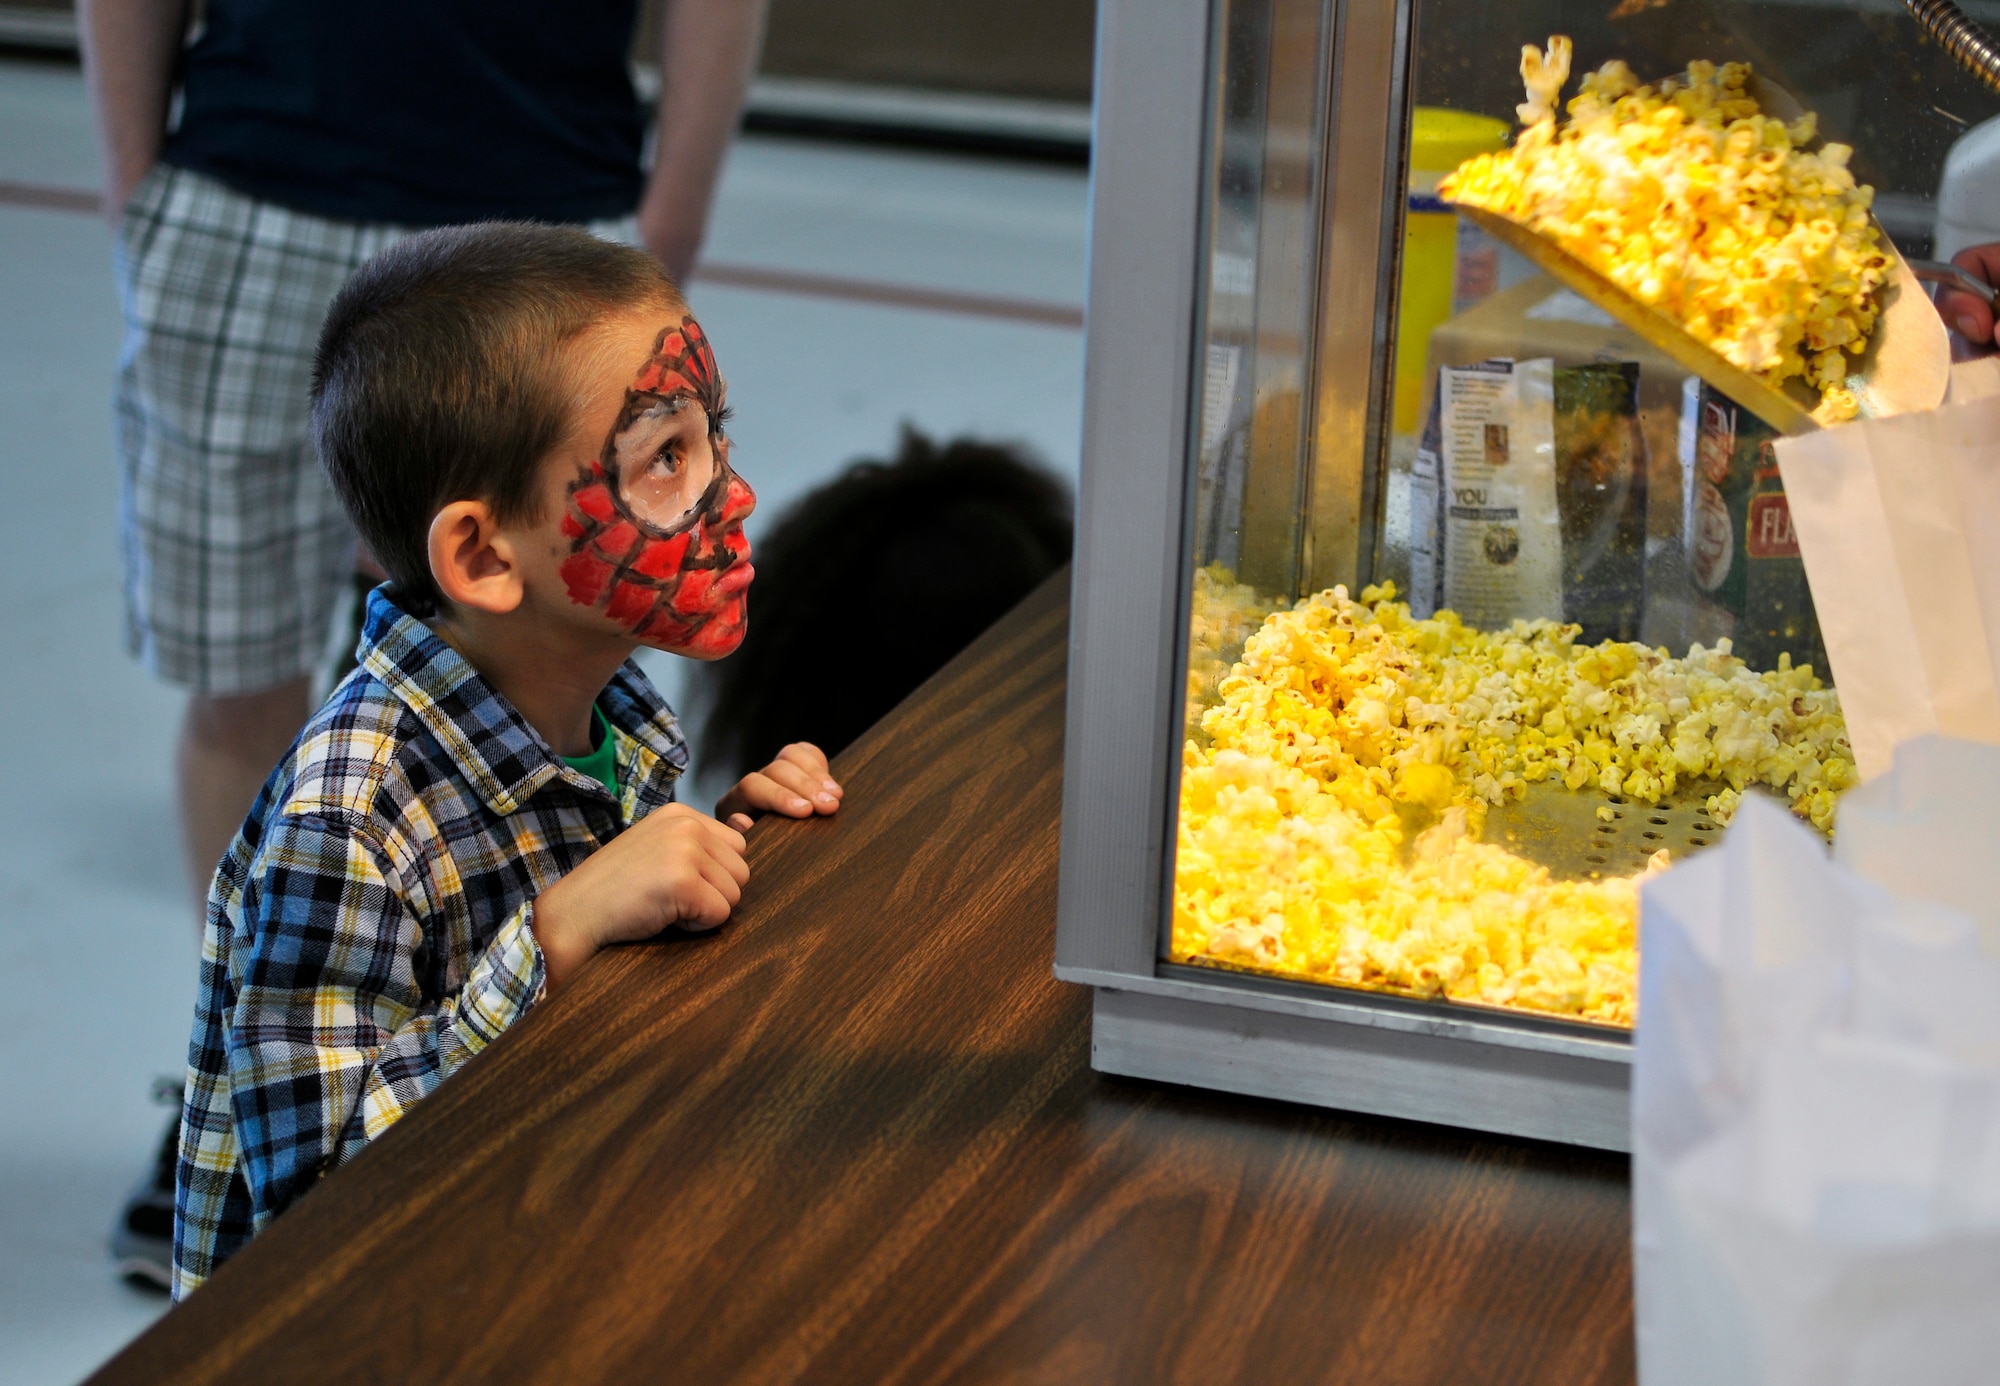 Timothy, son of a 182nd Airlift Wing technical sergeant, watches his bag of popcorn get filled during Wingman and Family Day at the 182nd Airlift Wing, Peoria, Ill., Sept. 12, 2015. The event was organized to promote resiliency in Airmen and their friends and family. (U.S. Air National Guard photo by Staff Sgt. Lealan Buehrer/Released)